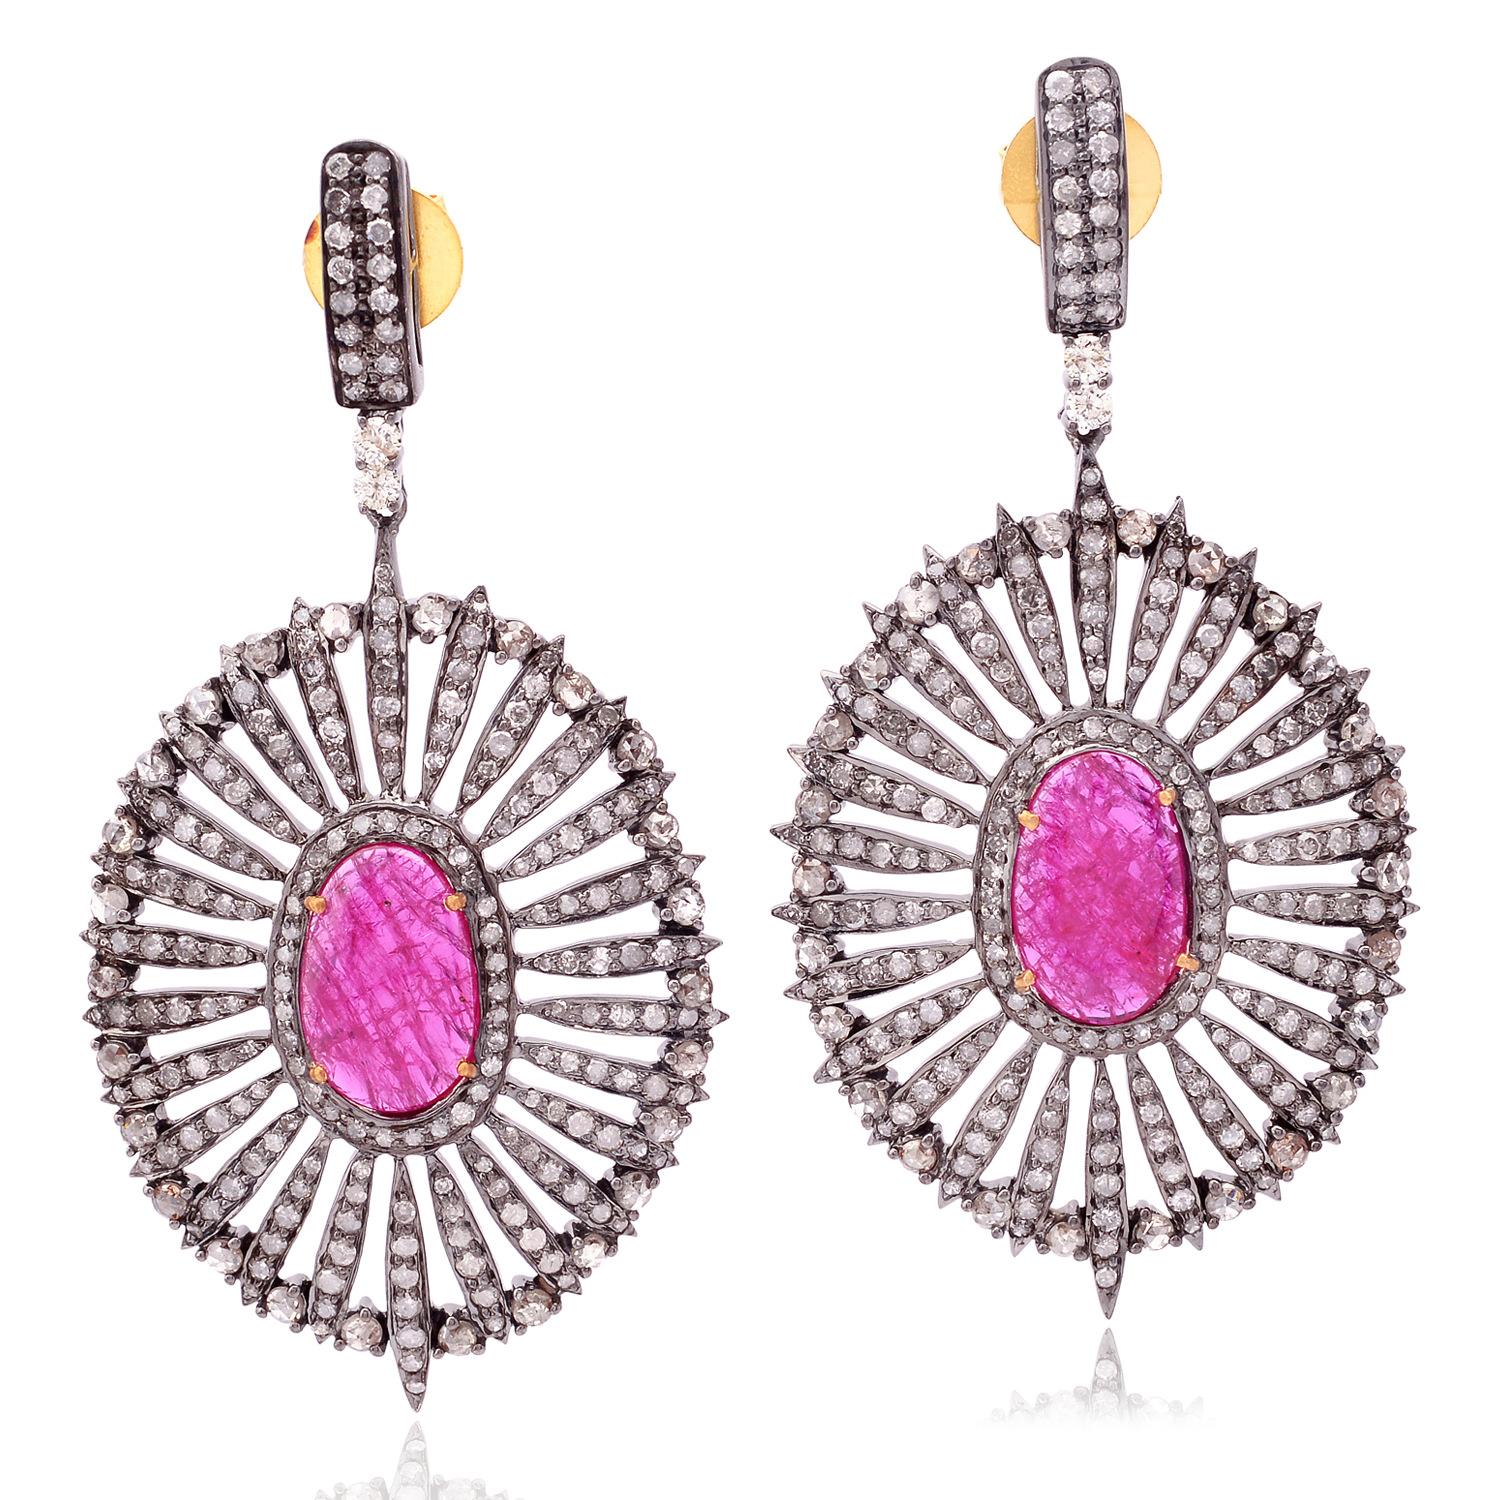 Round Cut Oval Shaped Ruby Sunburst Earrings with Pave Diamonds In 18k Gold & Silver For Sale